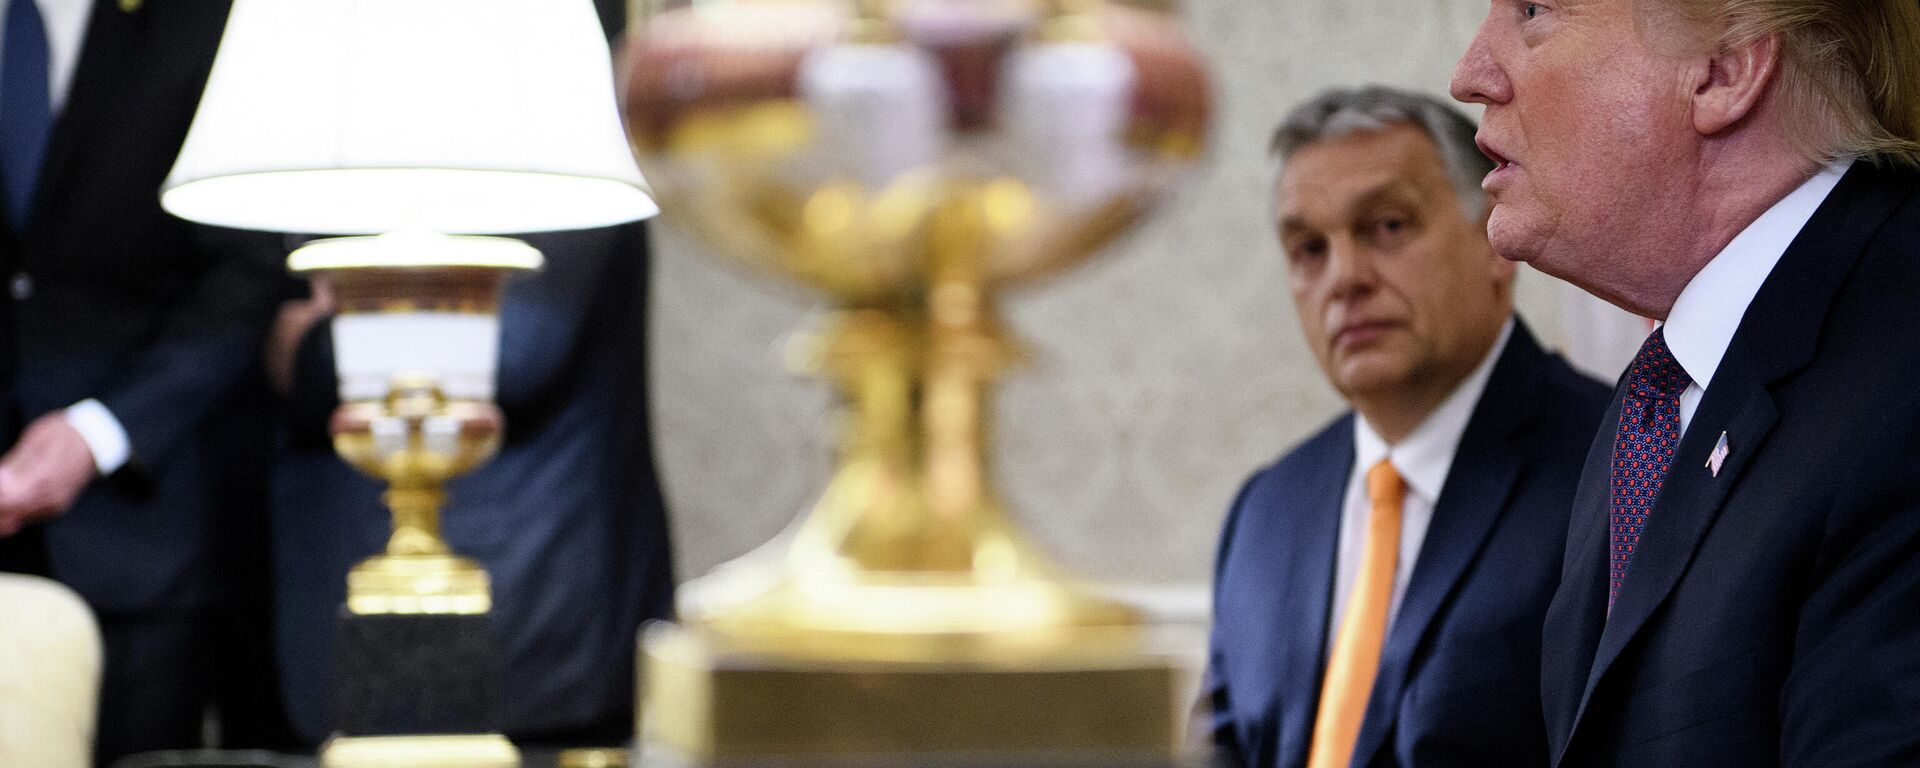 In this file photo taken on May 13, 2019 Hungary's Prime Minister Viktor Orban listens while US President Donald Trump speaks to the press before a meeting in the Oval Office of the White House in Washington, DC. - Sputnik International, 1920, 05.11.2023